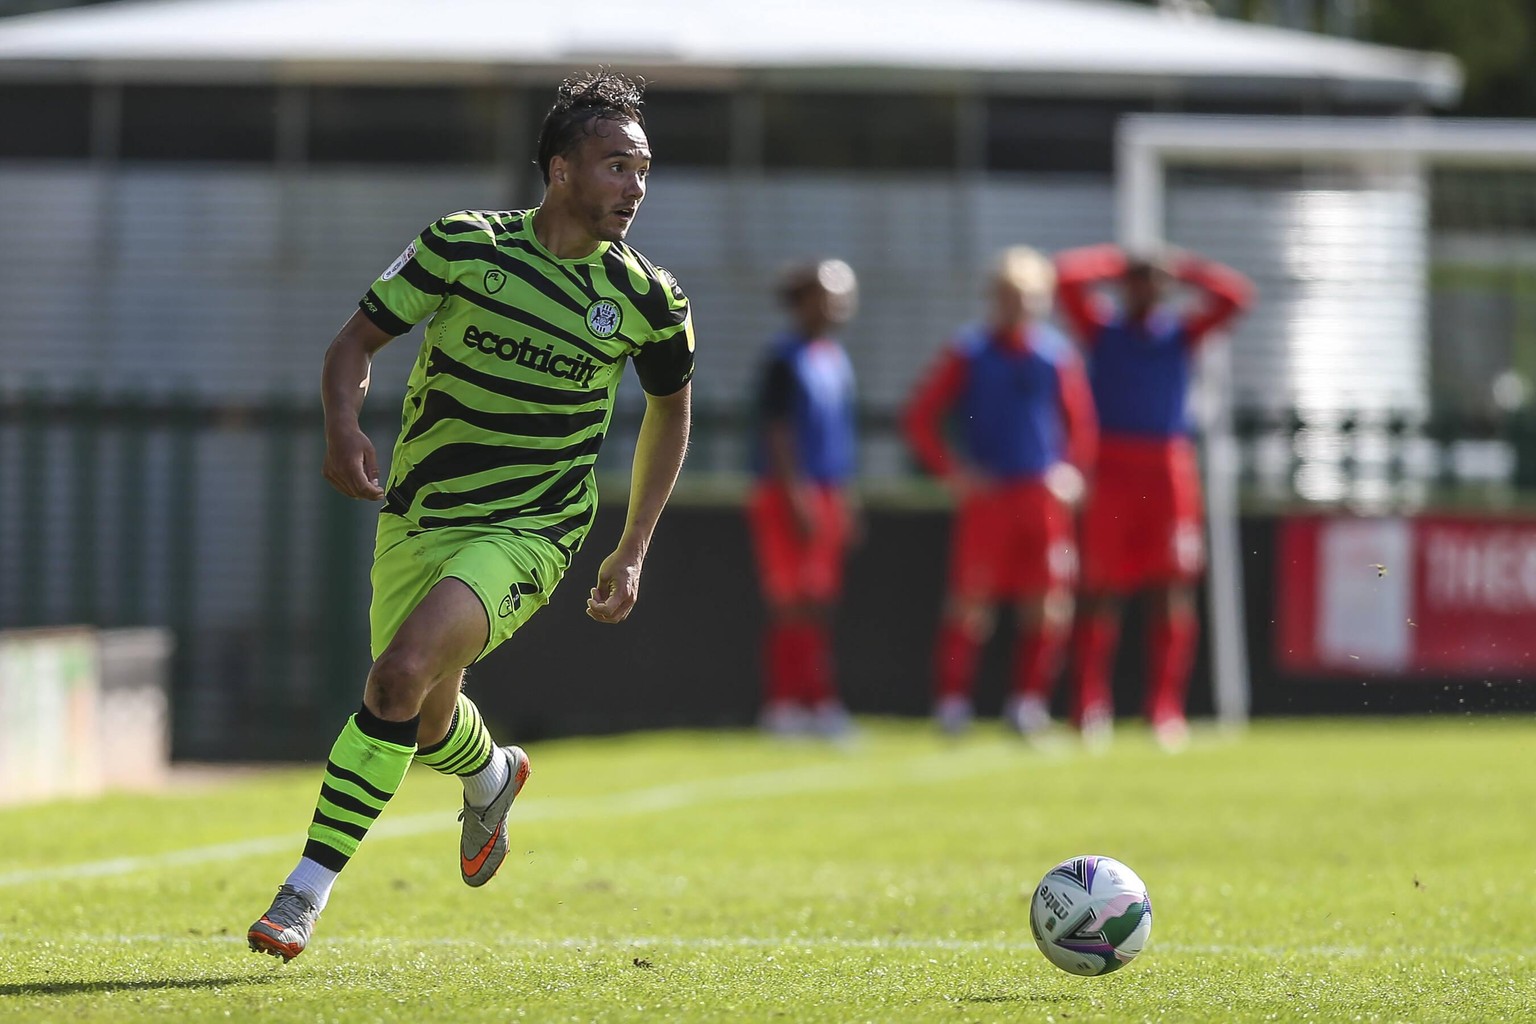 Forest Green Rovers v Leyton Orient EFL Cup 05/09/2020. Forest Green Rovers Kane Wilson2 runs forward during the EFL Cup match between Forest Green Rovers and Leyton Orient at the New Lawn, Forest Gre ...